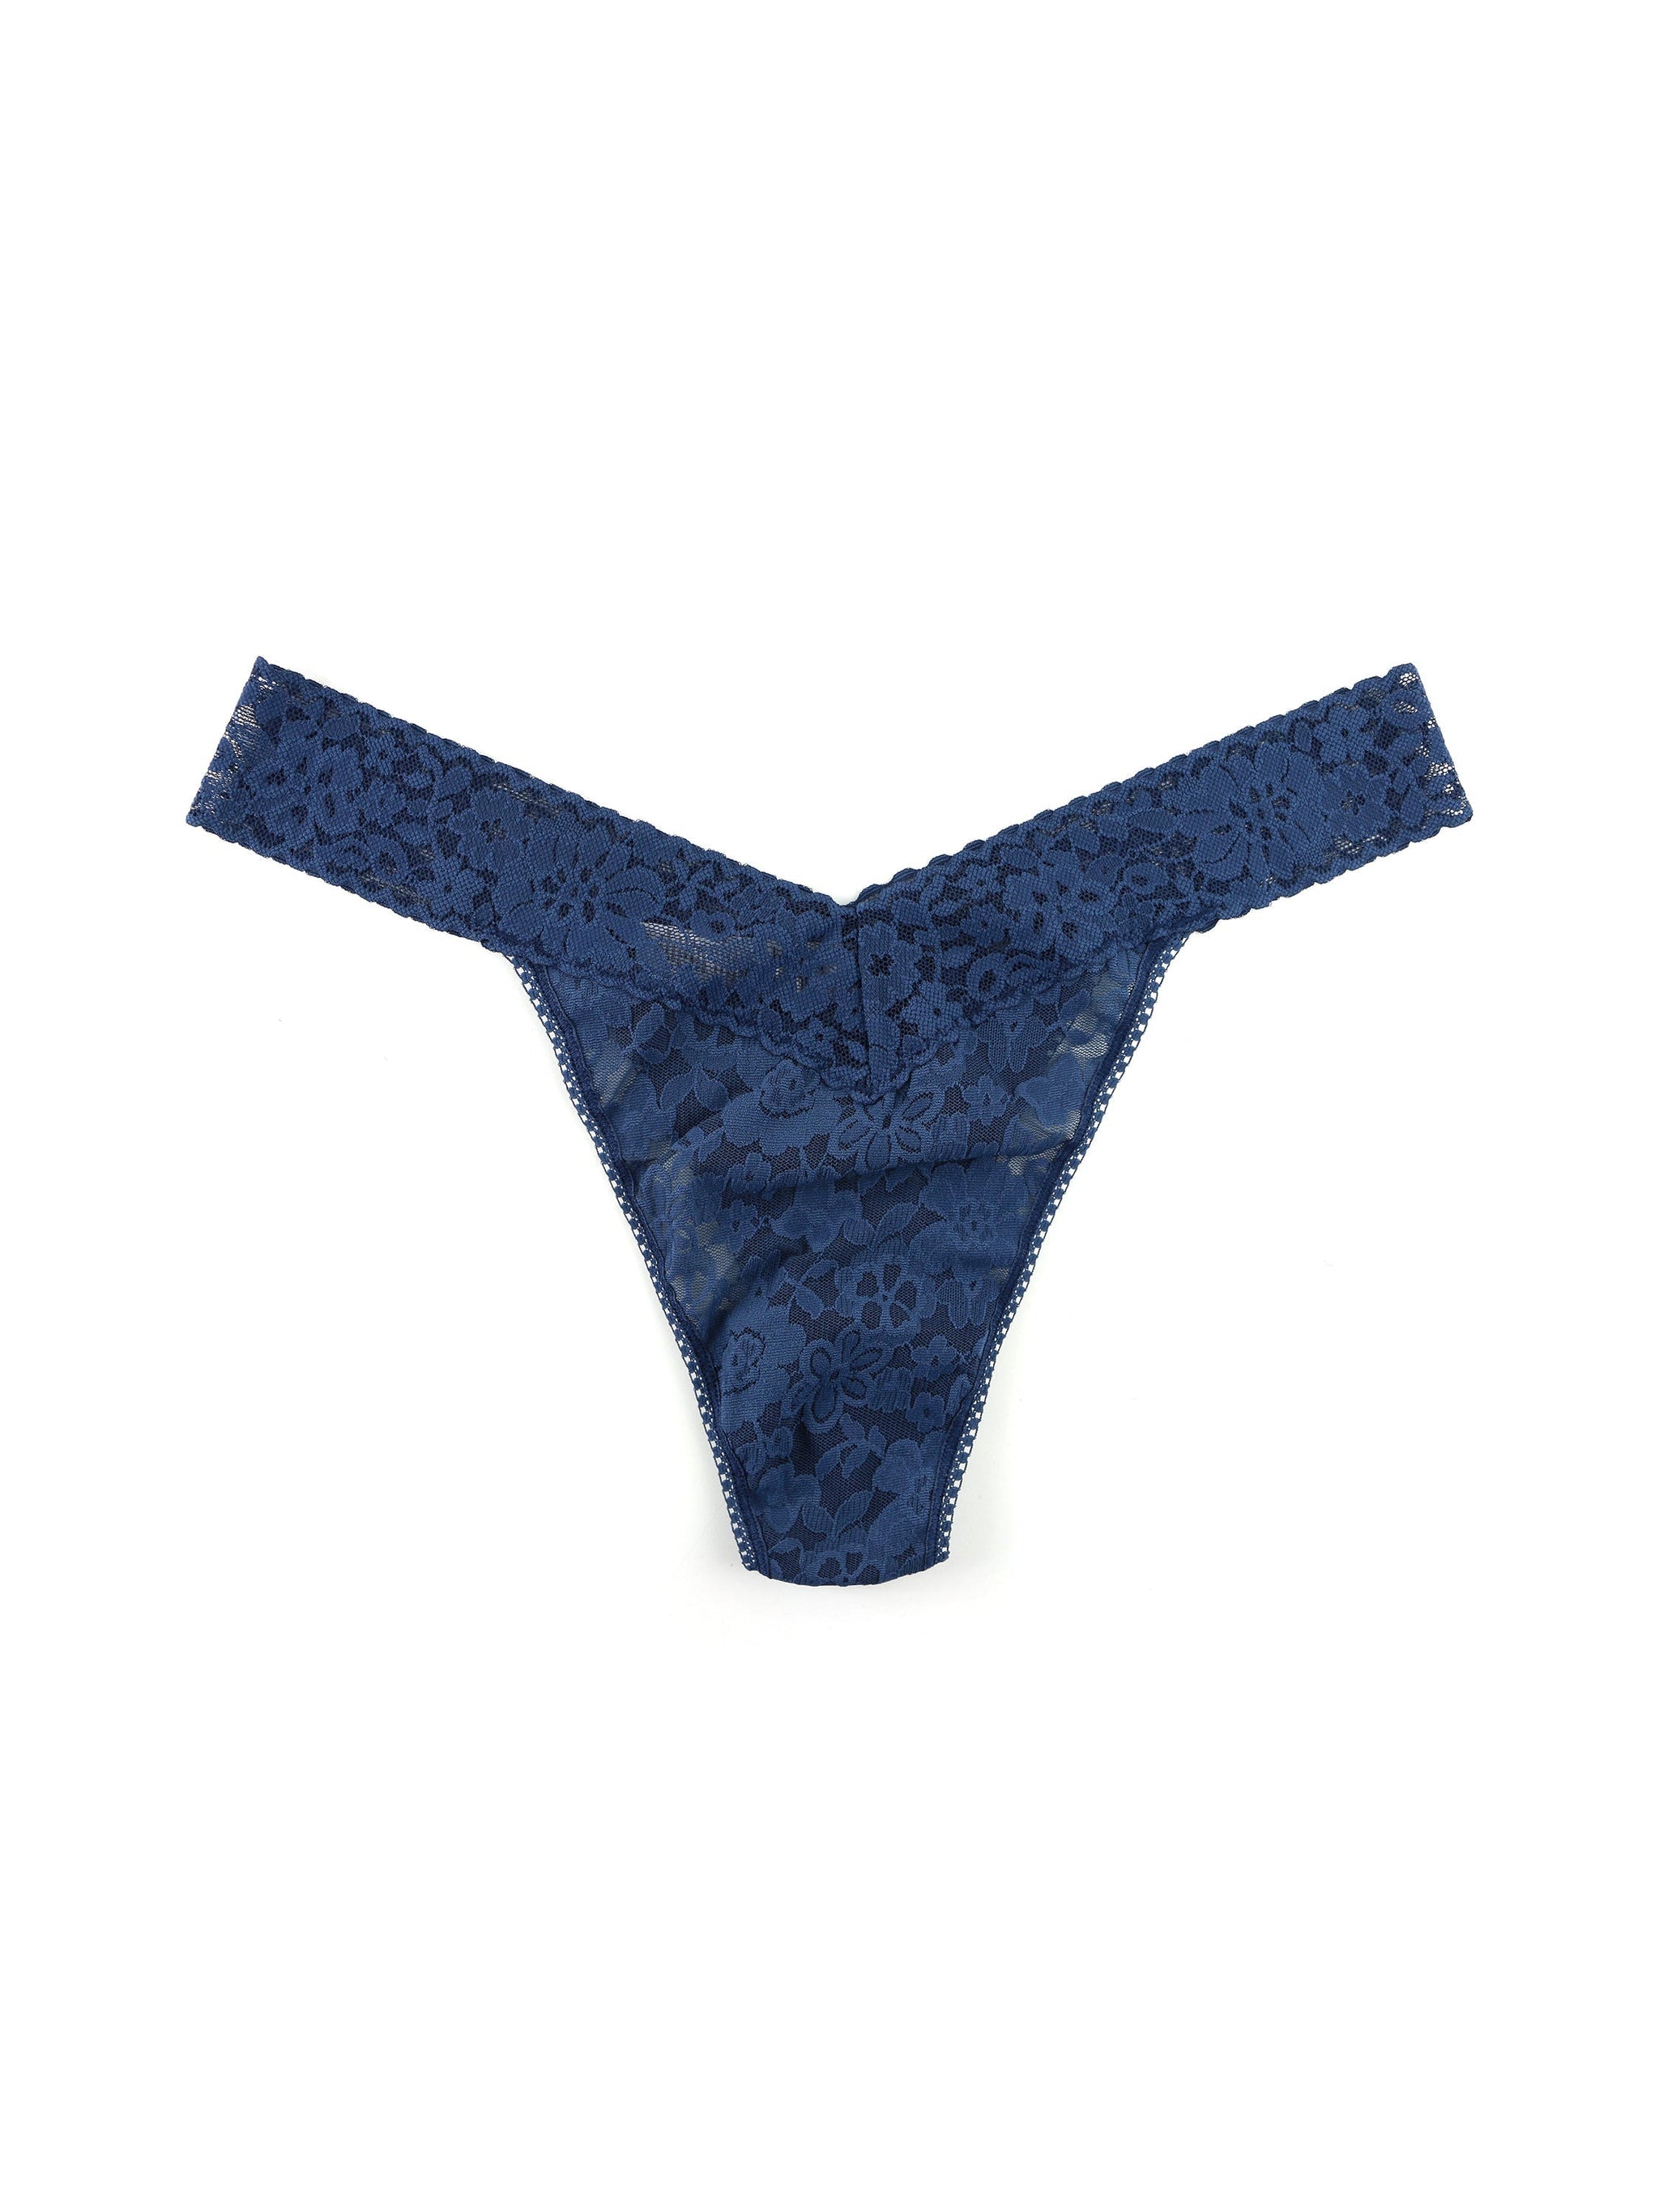 Plus Size Daily Lace™ Original Rise Thong Exclusive Nightshade Blue